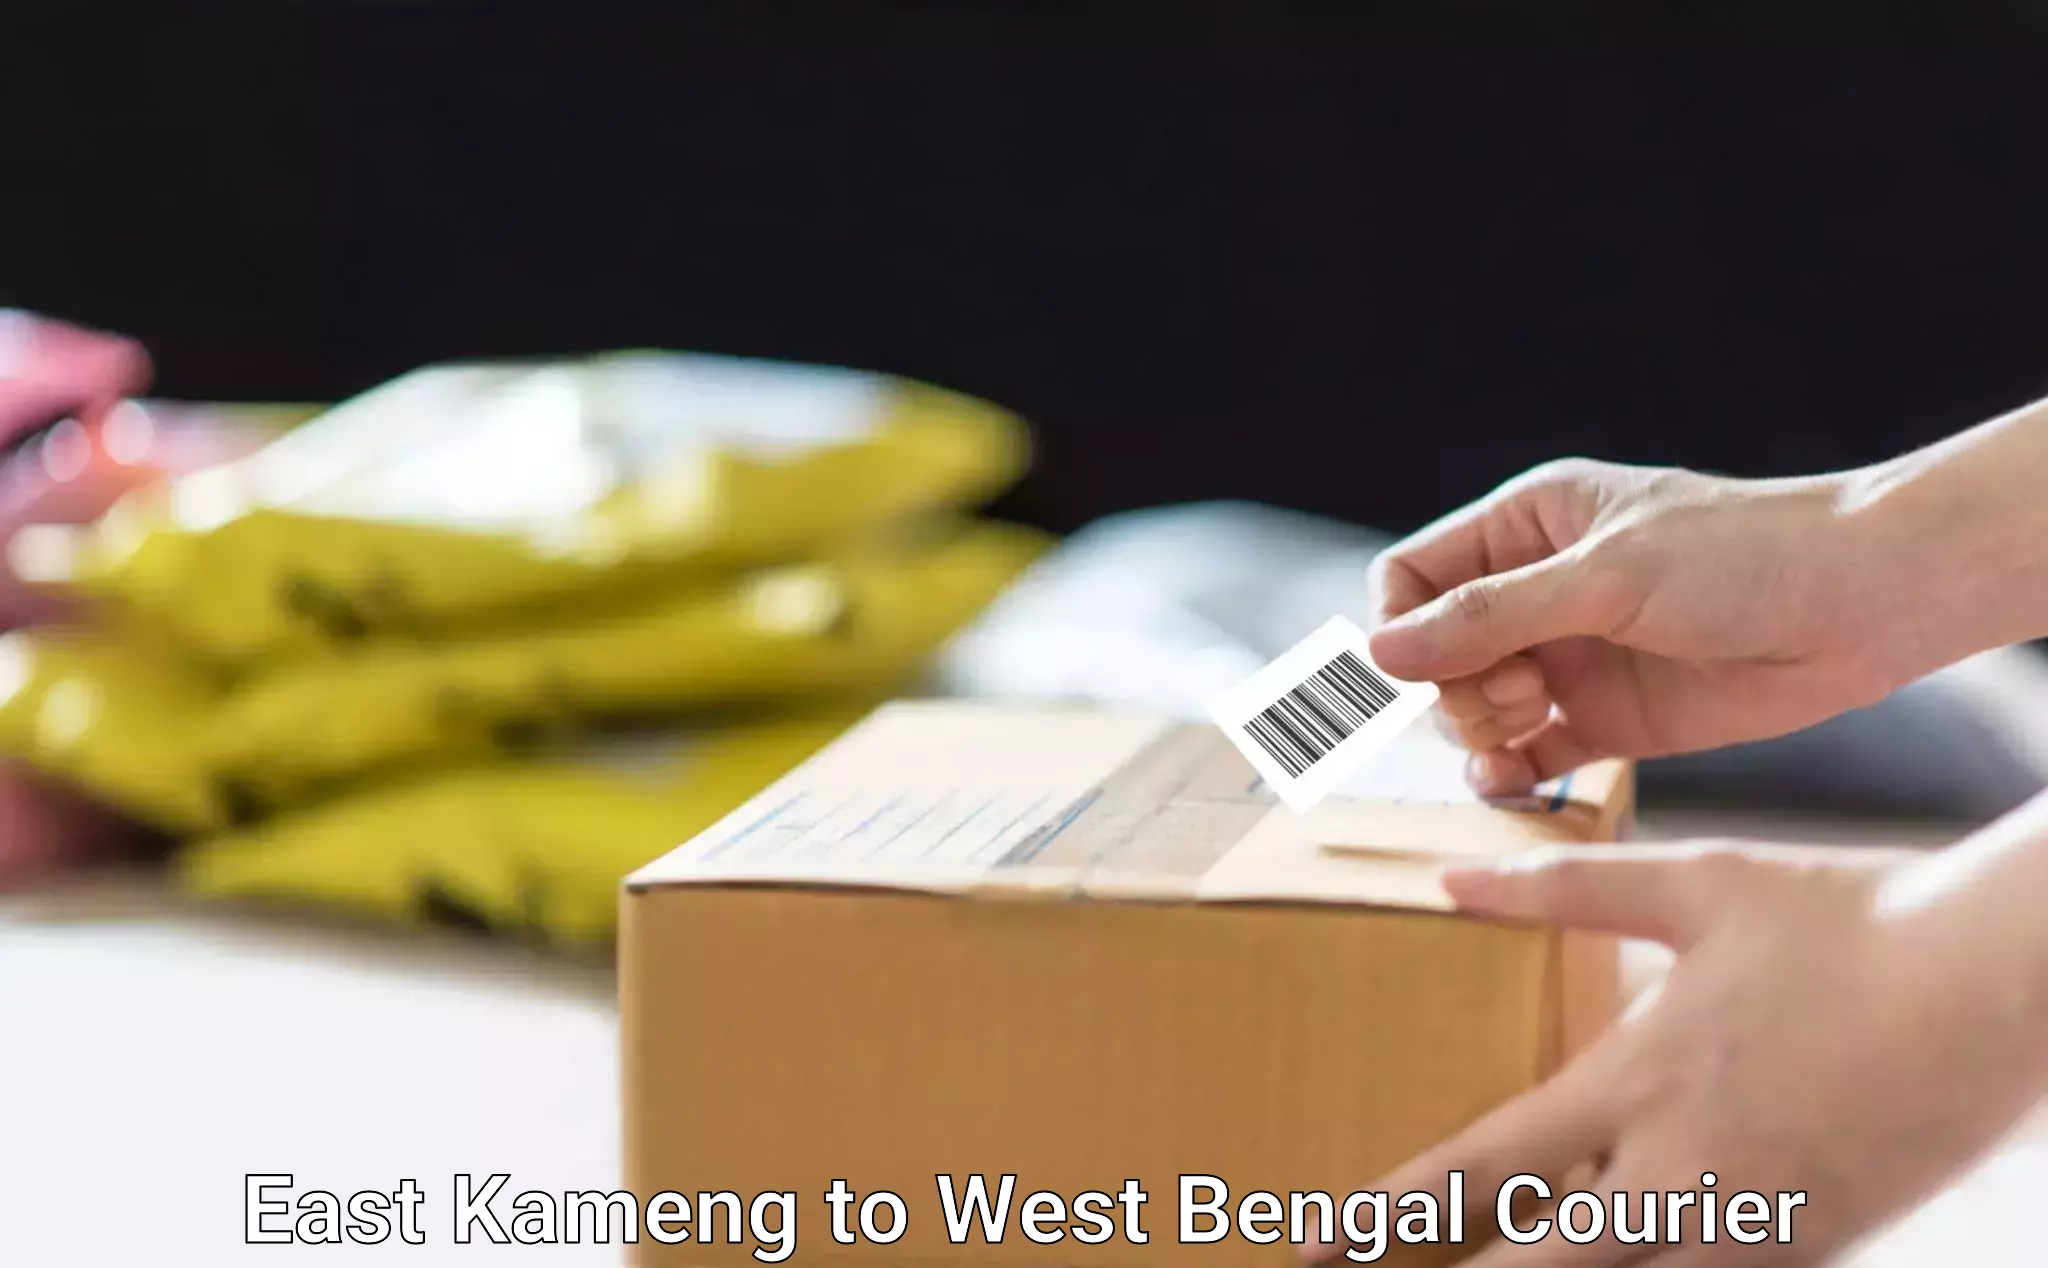 Easy access courier services East Kameng to Kolkata Port